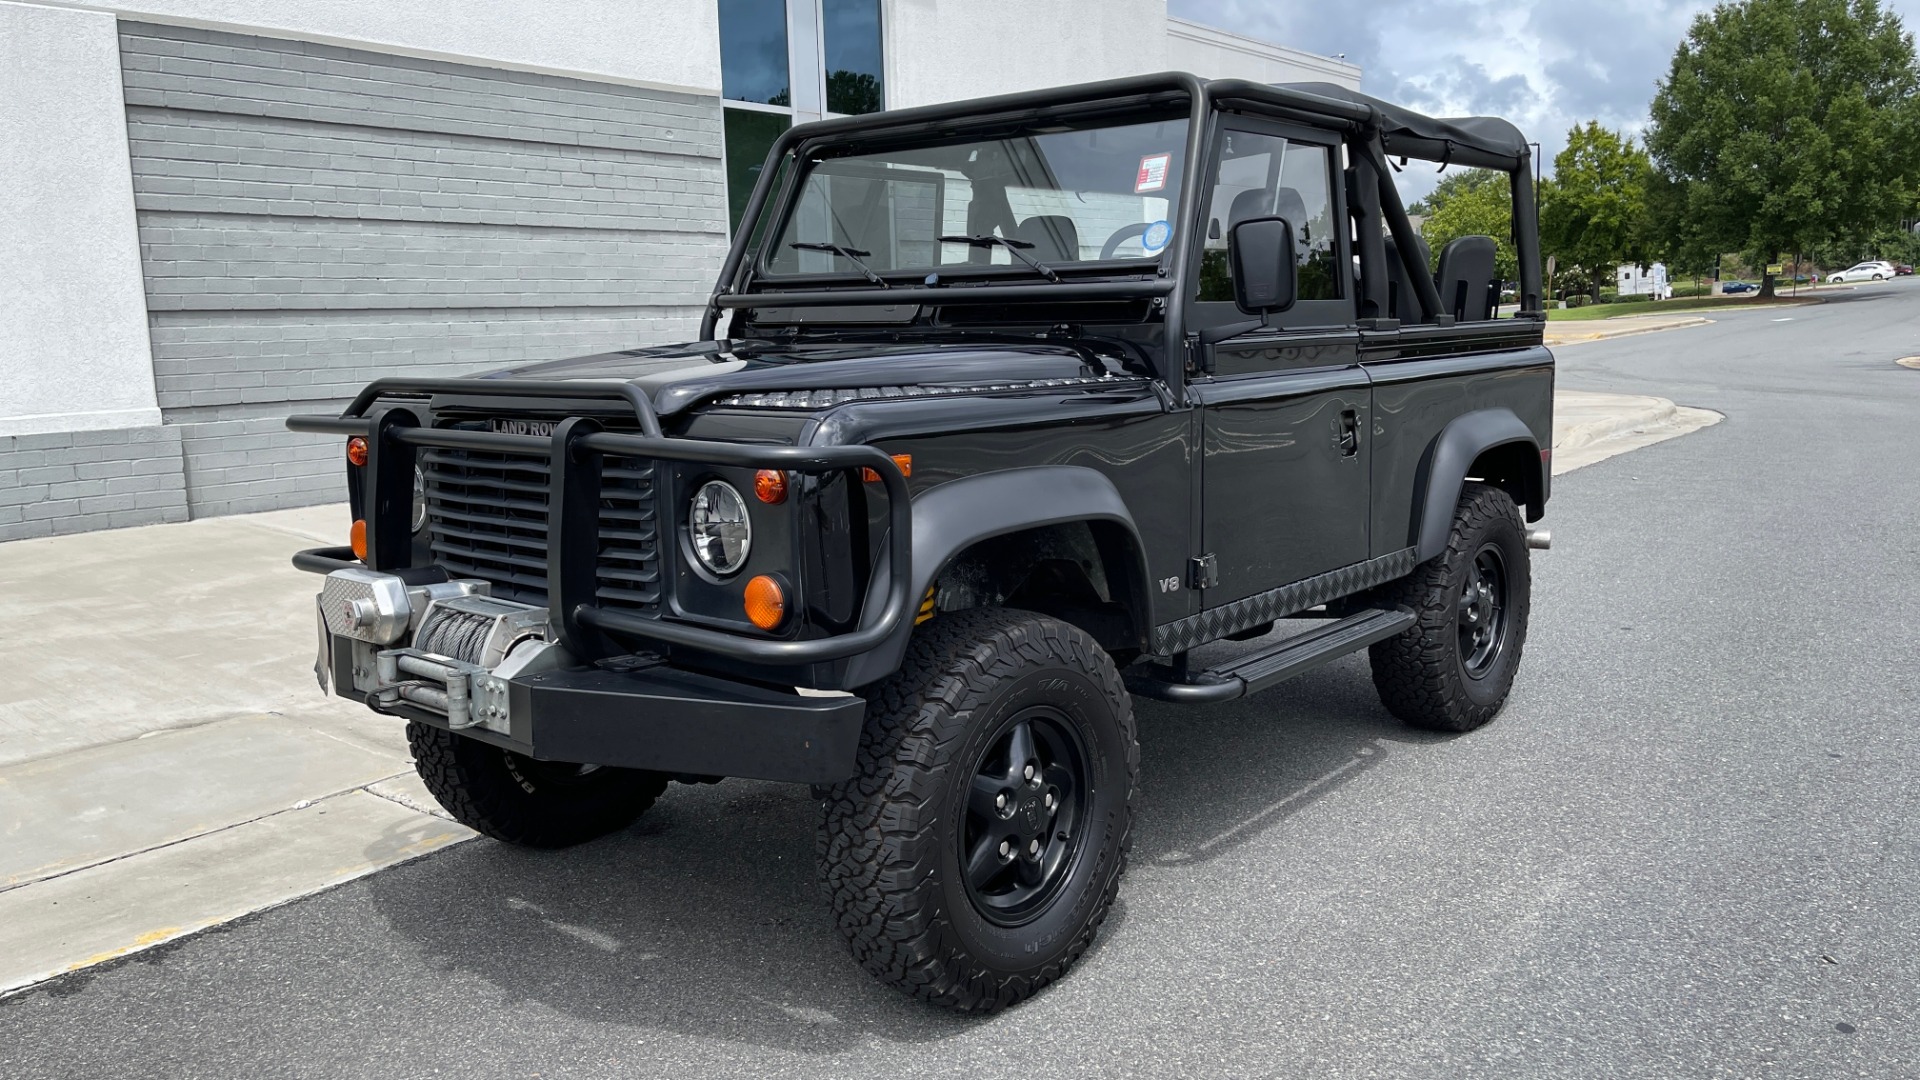 Used 1995 Land Rover DEFENDER 90 4x4 / 3.9L V8 / SOFT-TOP / 5-SPD MANUAL / RUNS GREAT for sale Sold at Formula Imports in Charlotte NC 28227 3